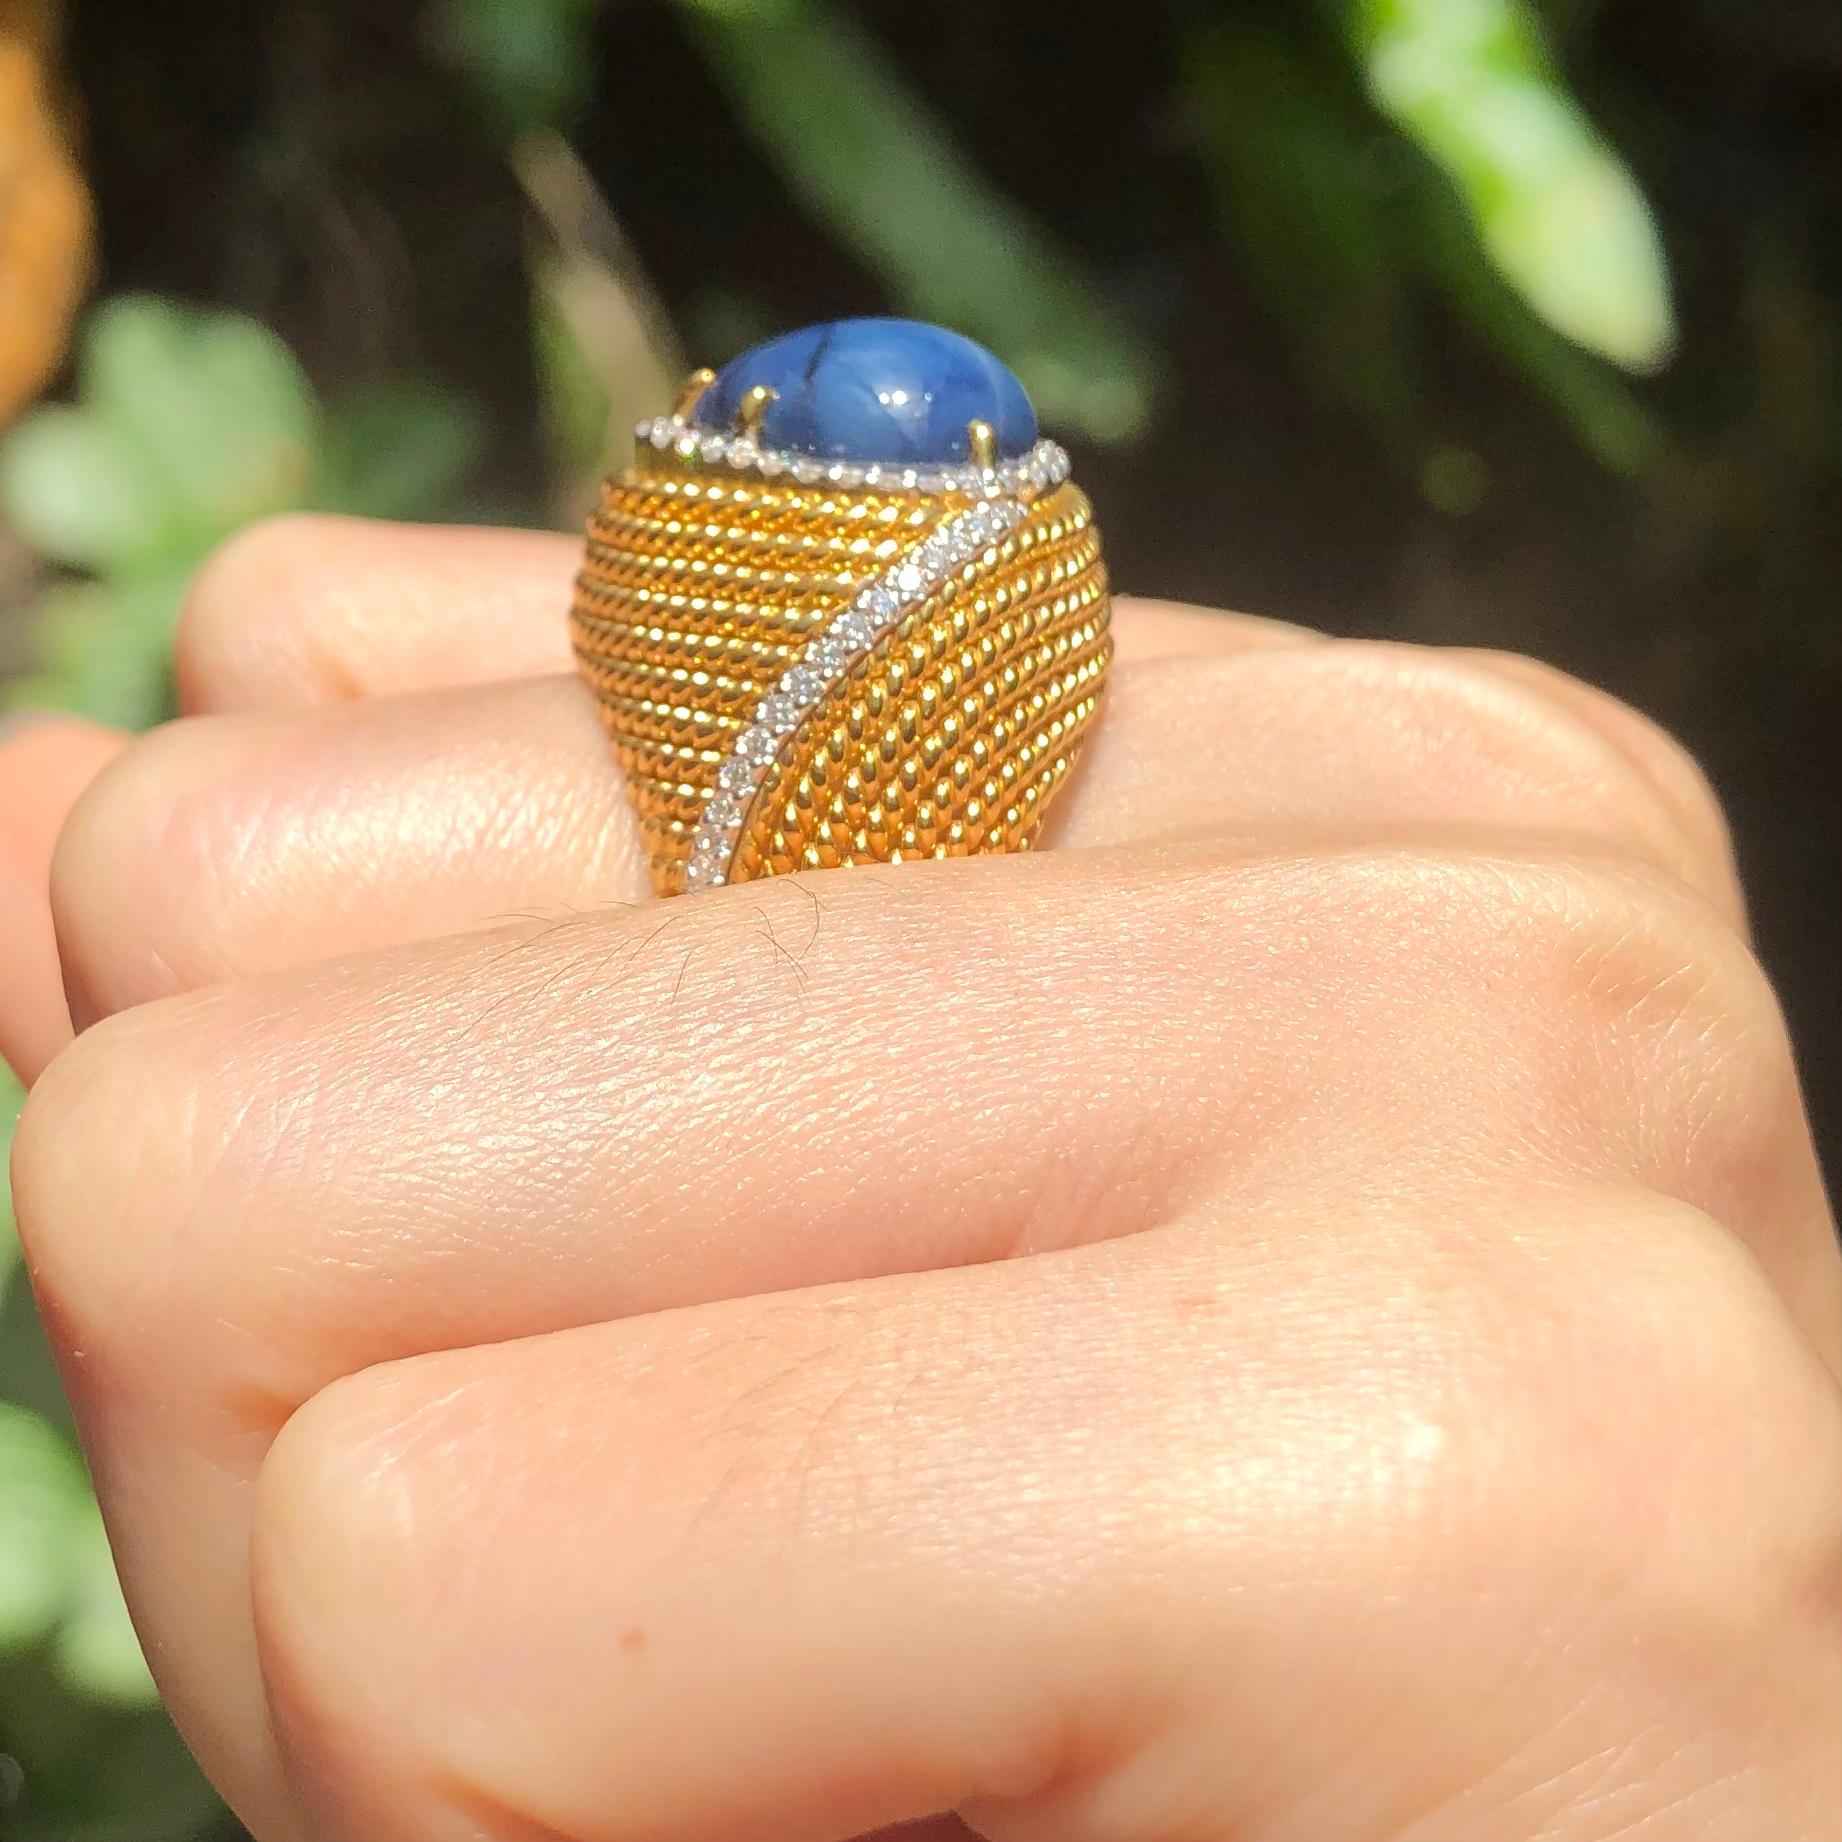 Cabochon Blue Star Sapphire with Diamond Ring Set in 18 Karat Gold Settings For Sale